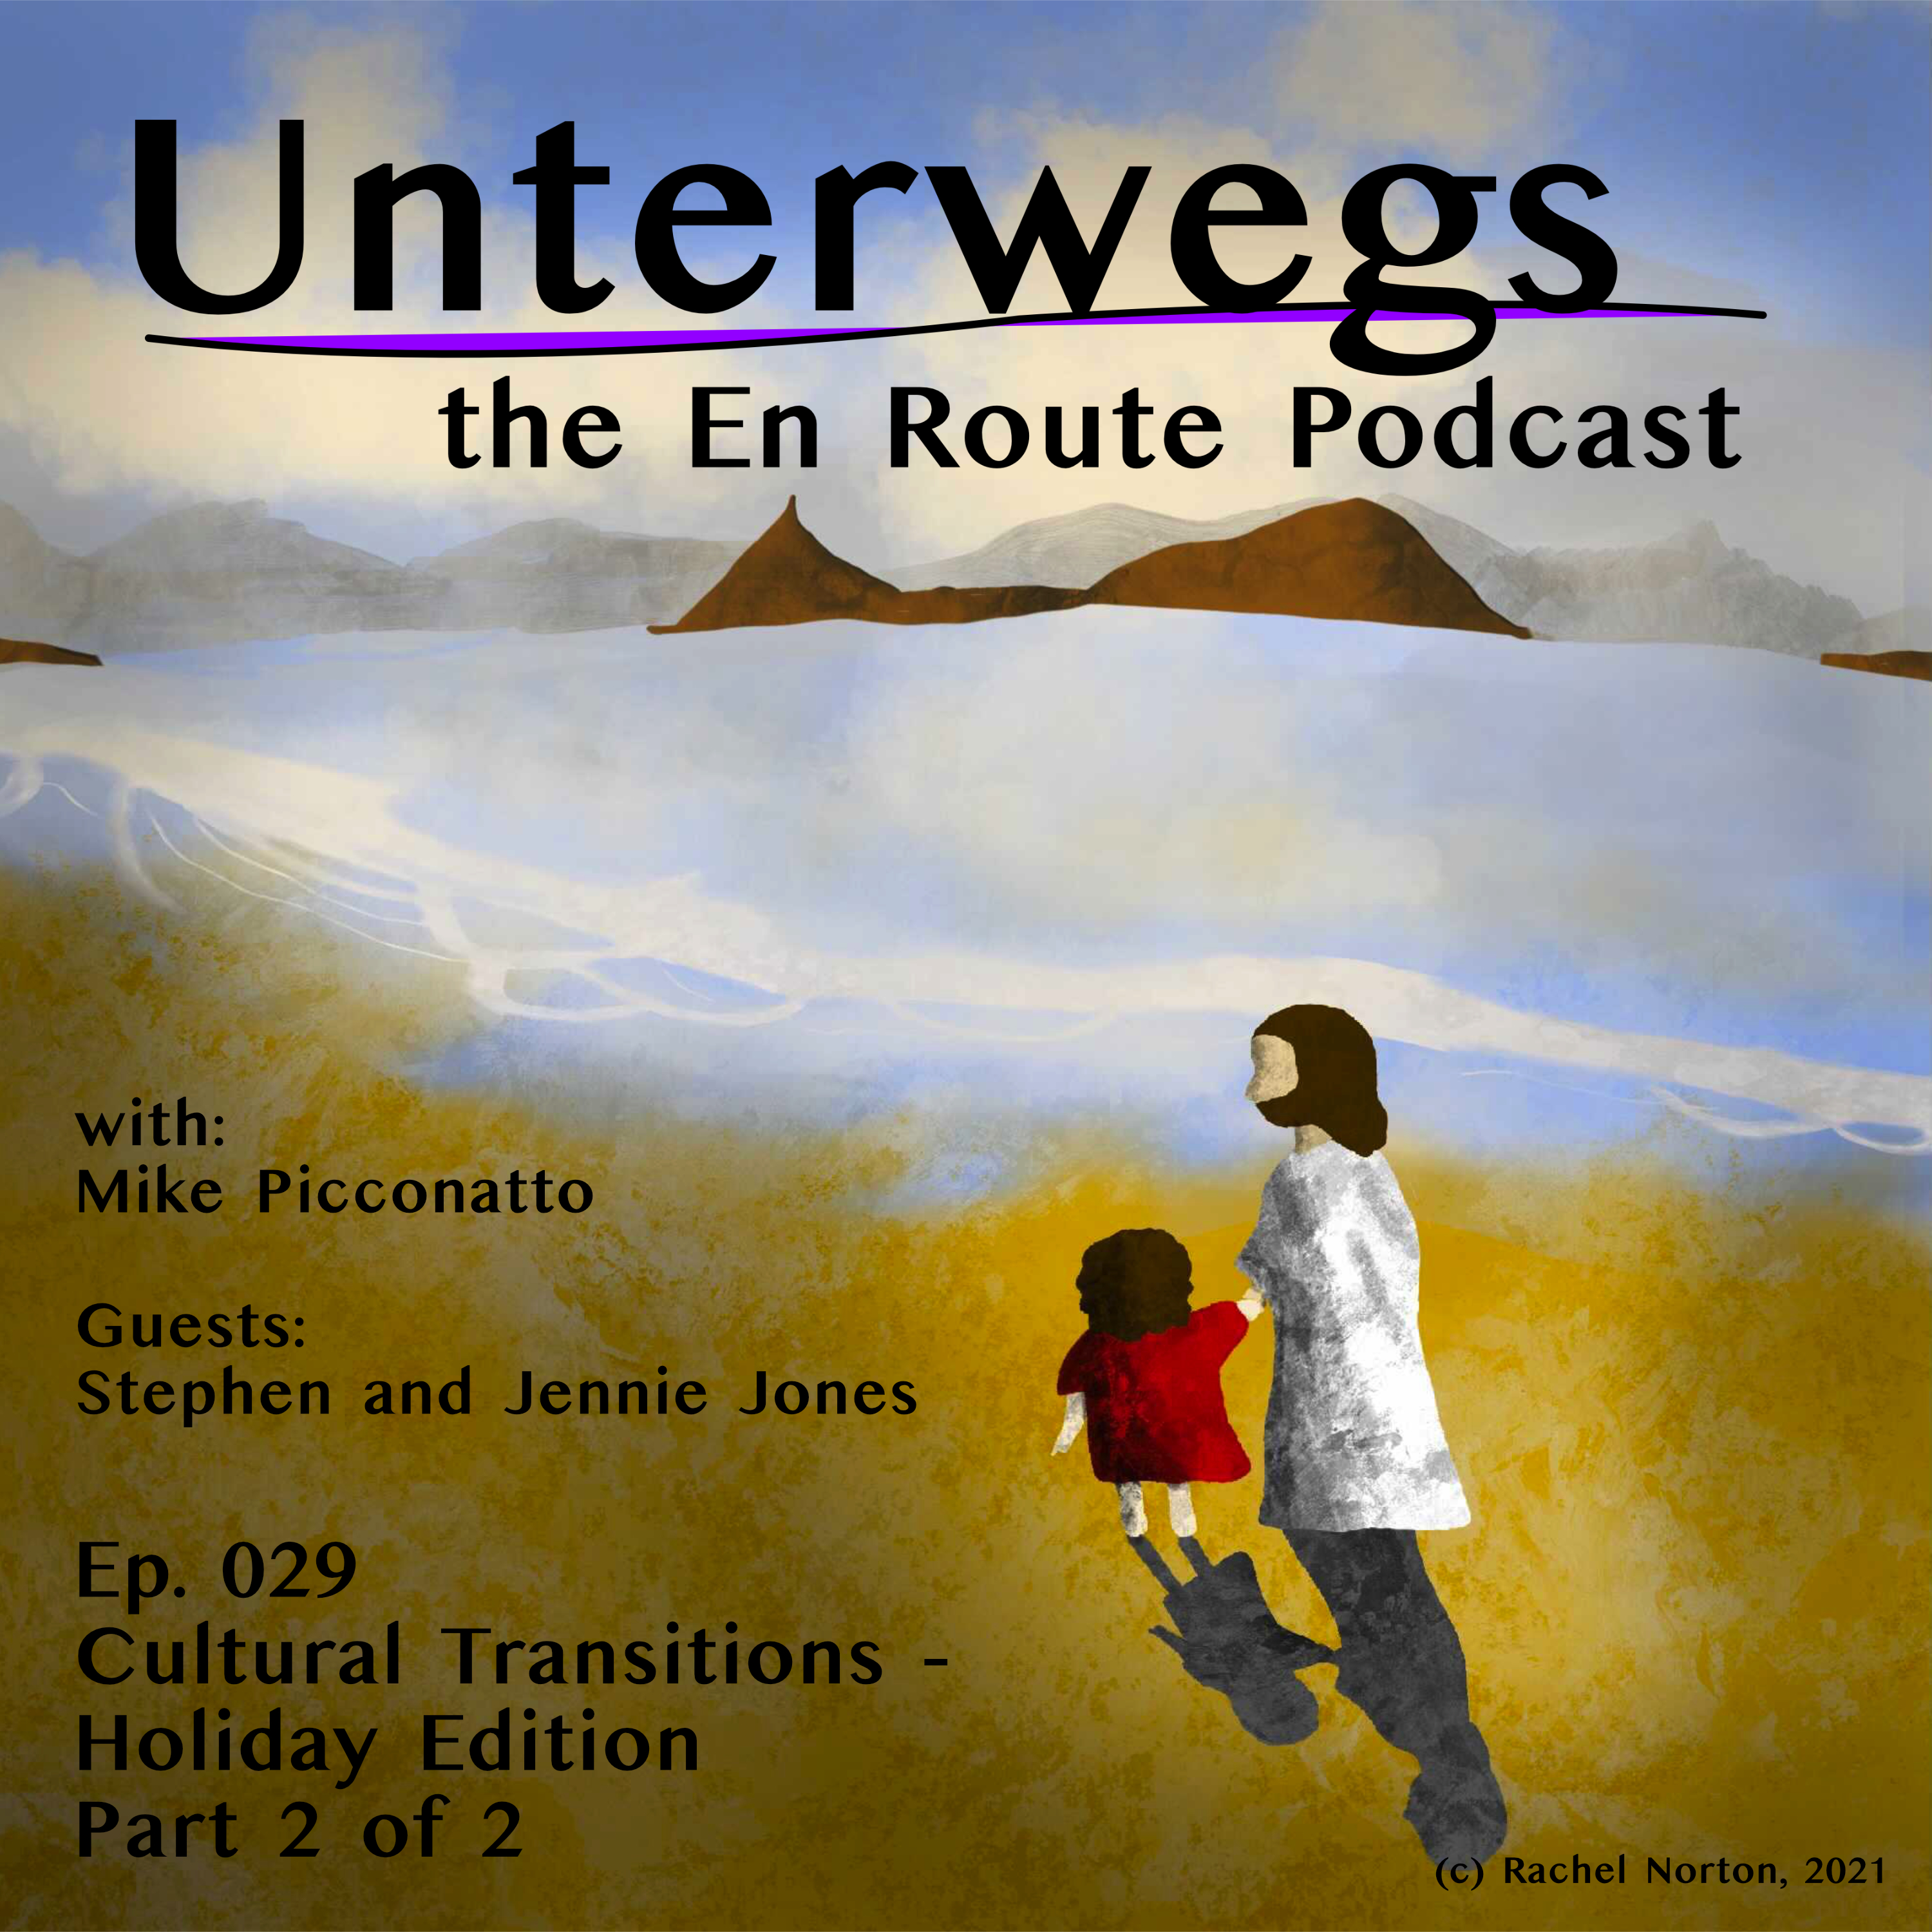 Episode 029 - Cultural Transitions - Holiday Edition - part 2 of 2 